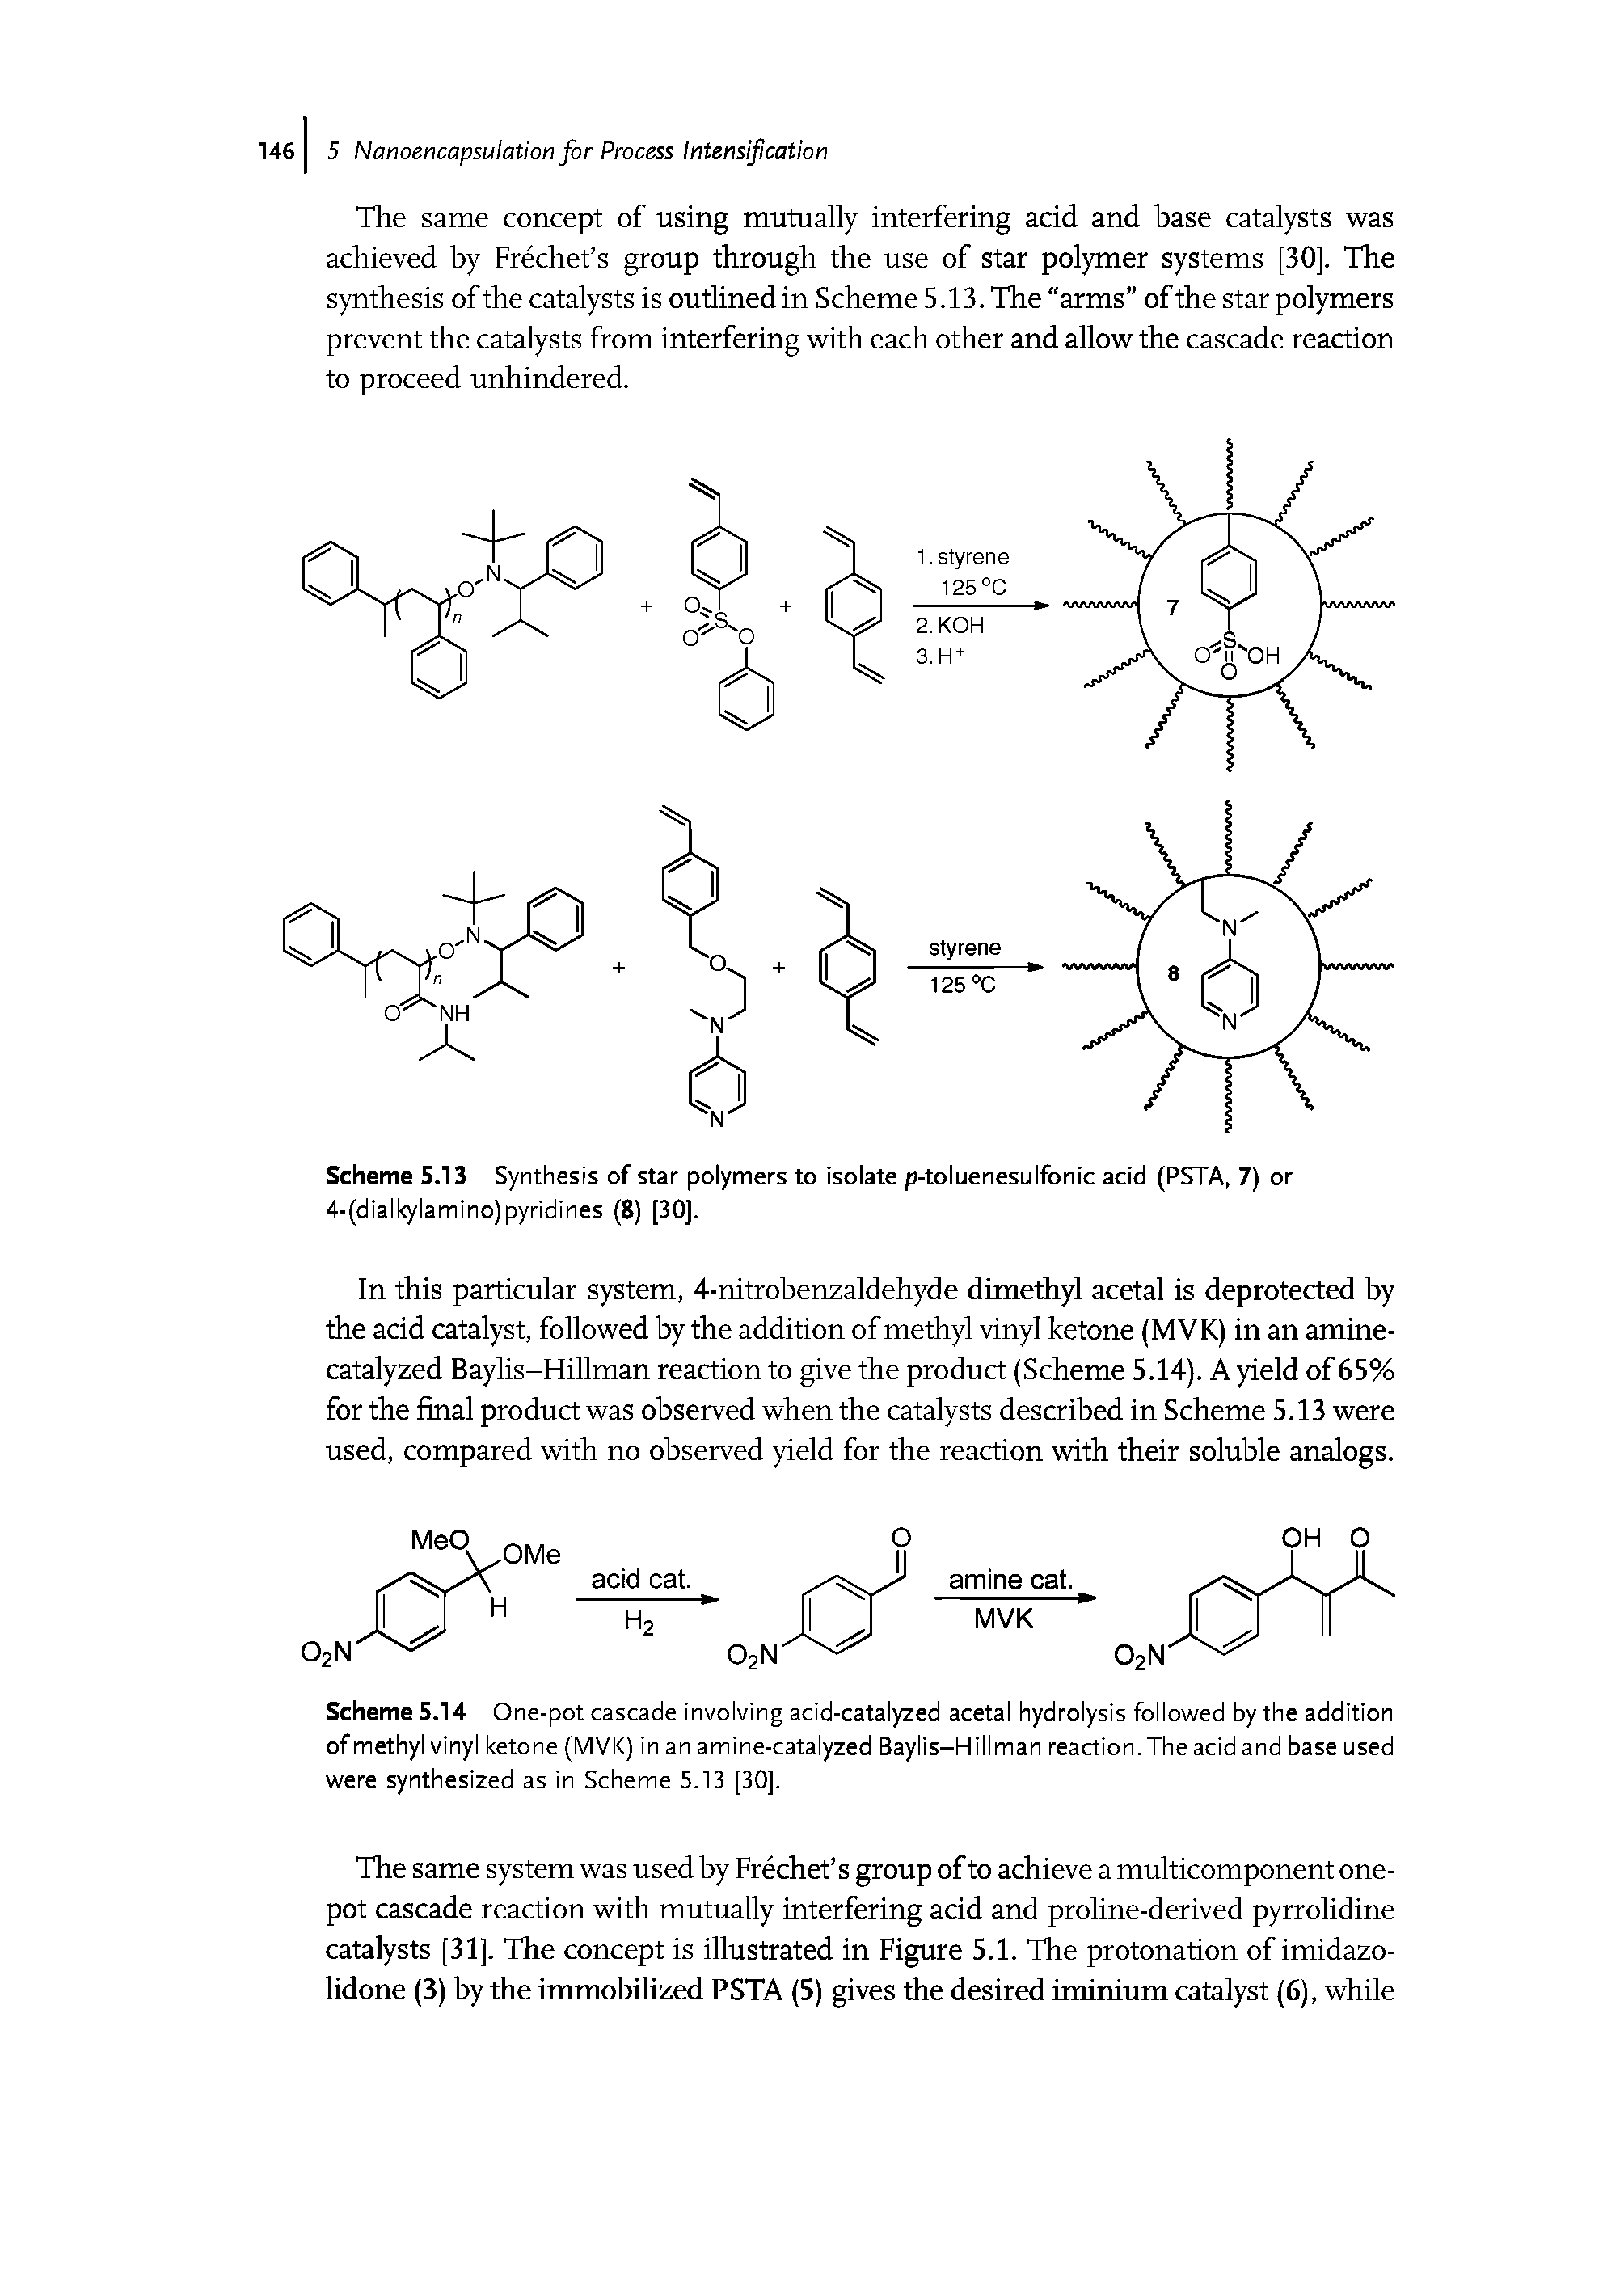 Scheme 5.13 Synthesis of star polymers to isolate p-toluenesulfonic acid (PSTA, 7) or 4-(dial kylamino) pyridines (8) [30].